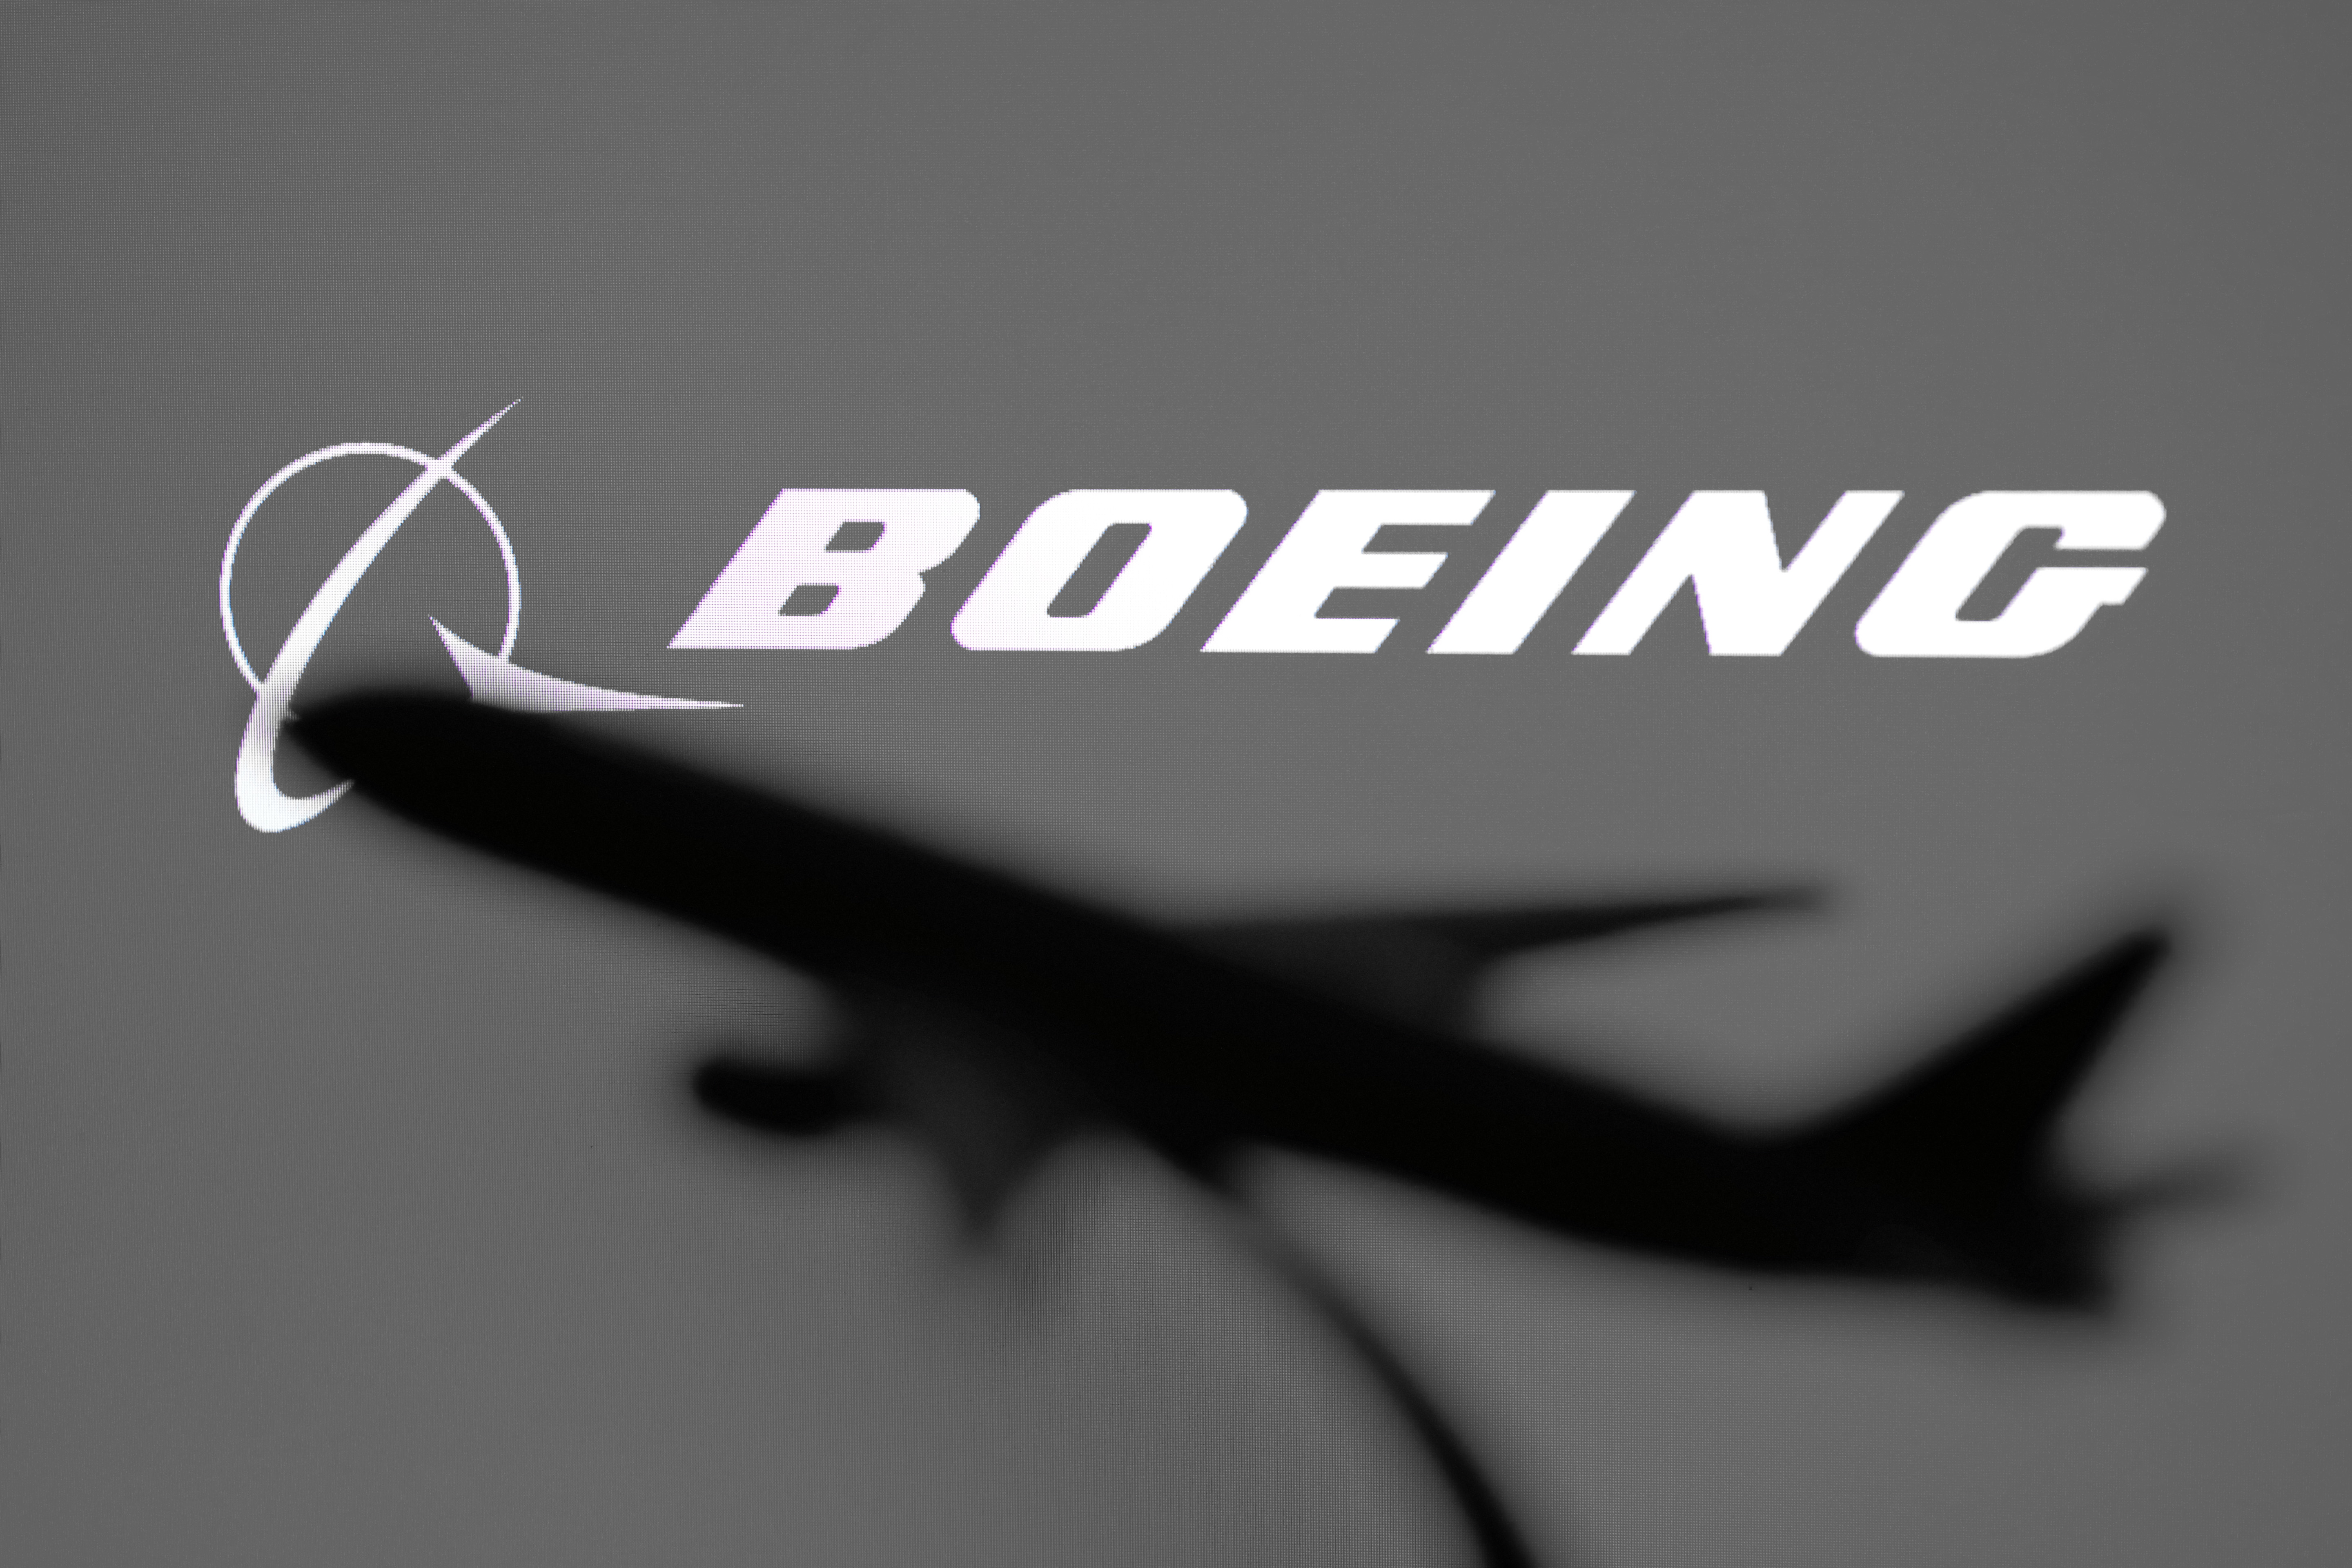 11 Chinese airlines seek compensation from Boeing over grounded 737 MAX fleet